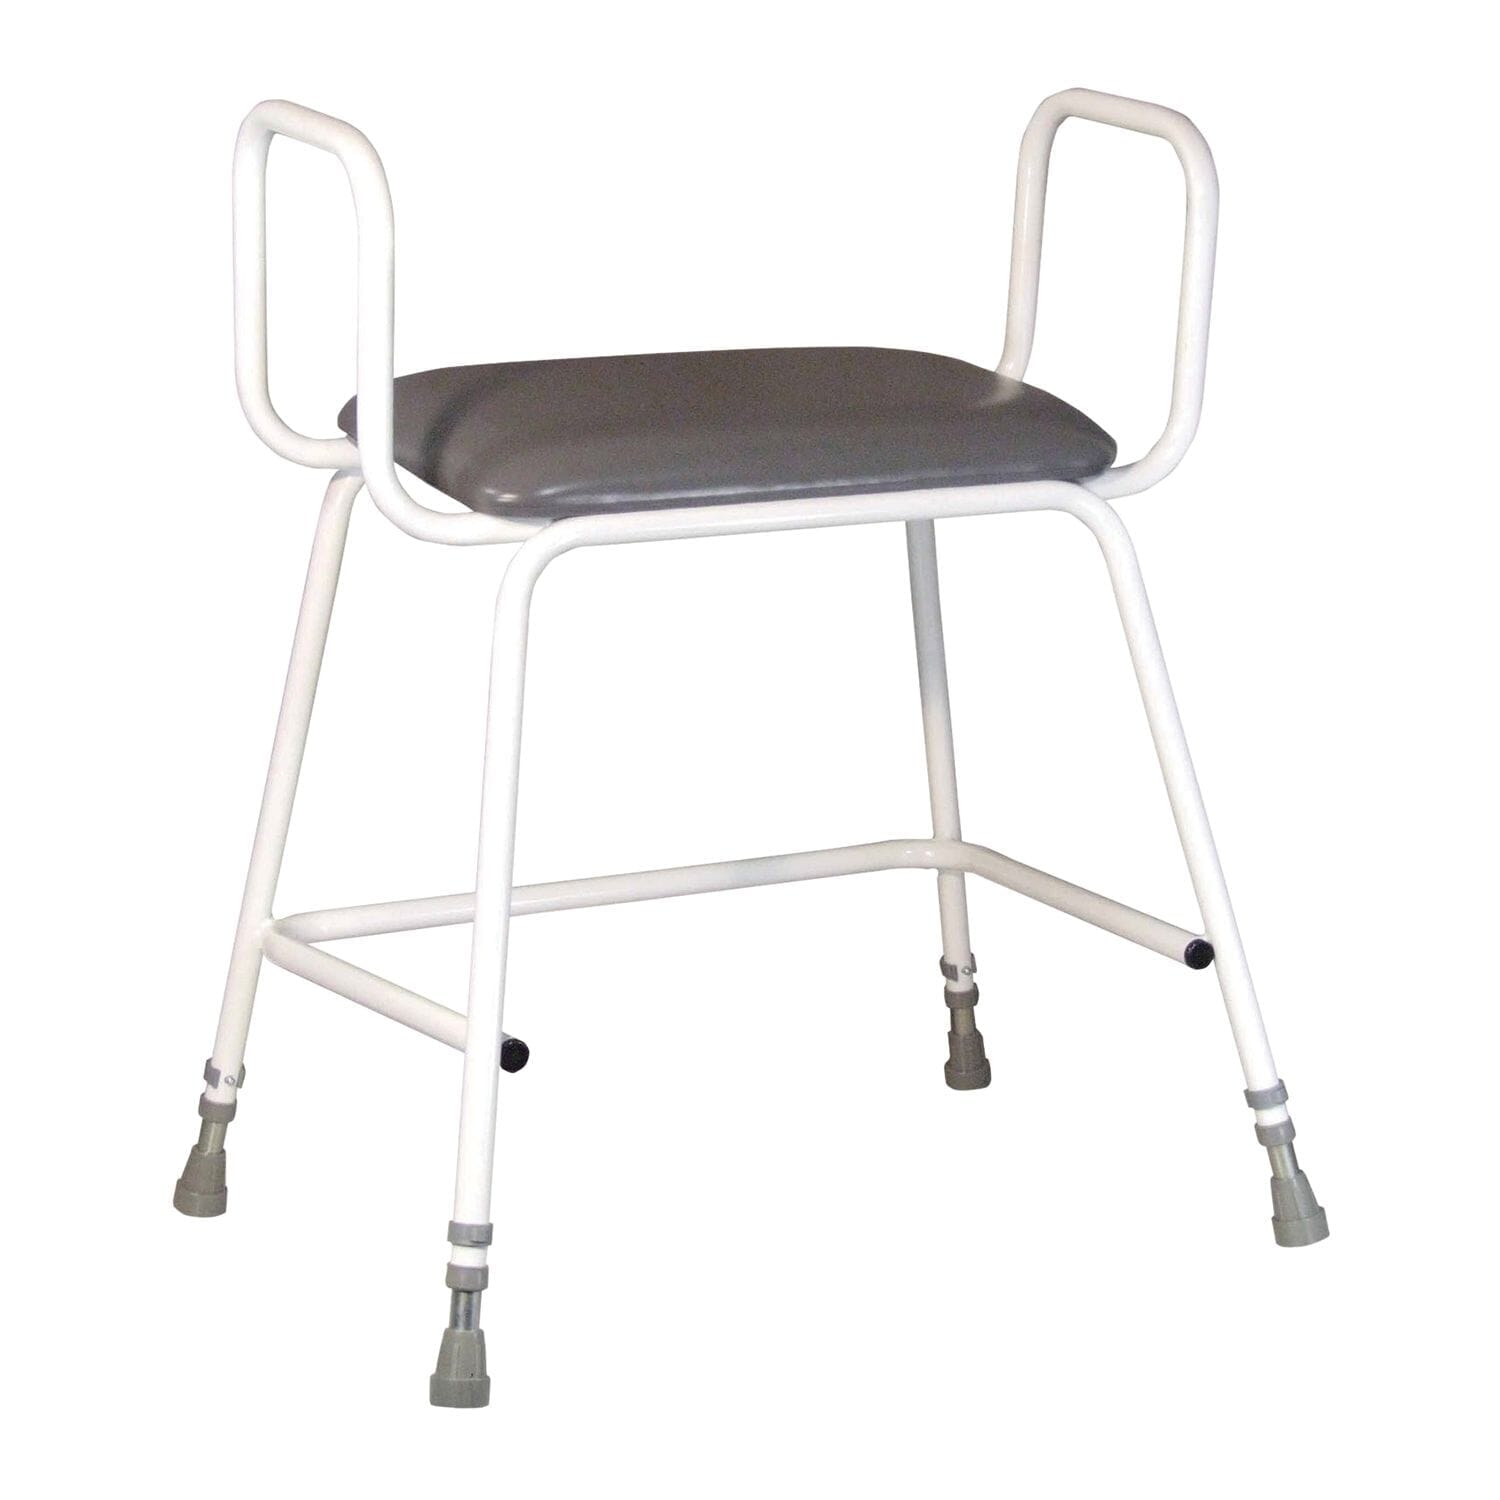 View Torbay Bariatric Perching Stool With Arms information